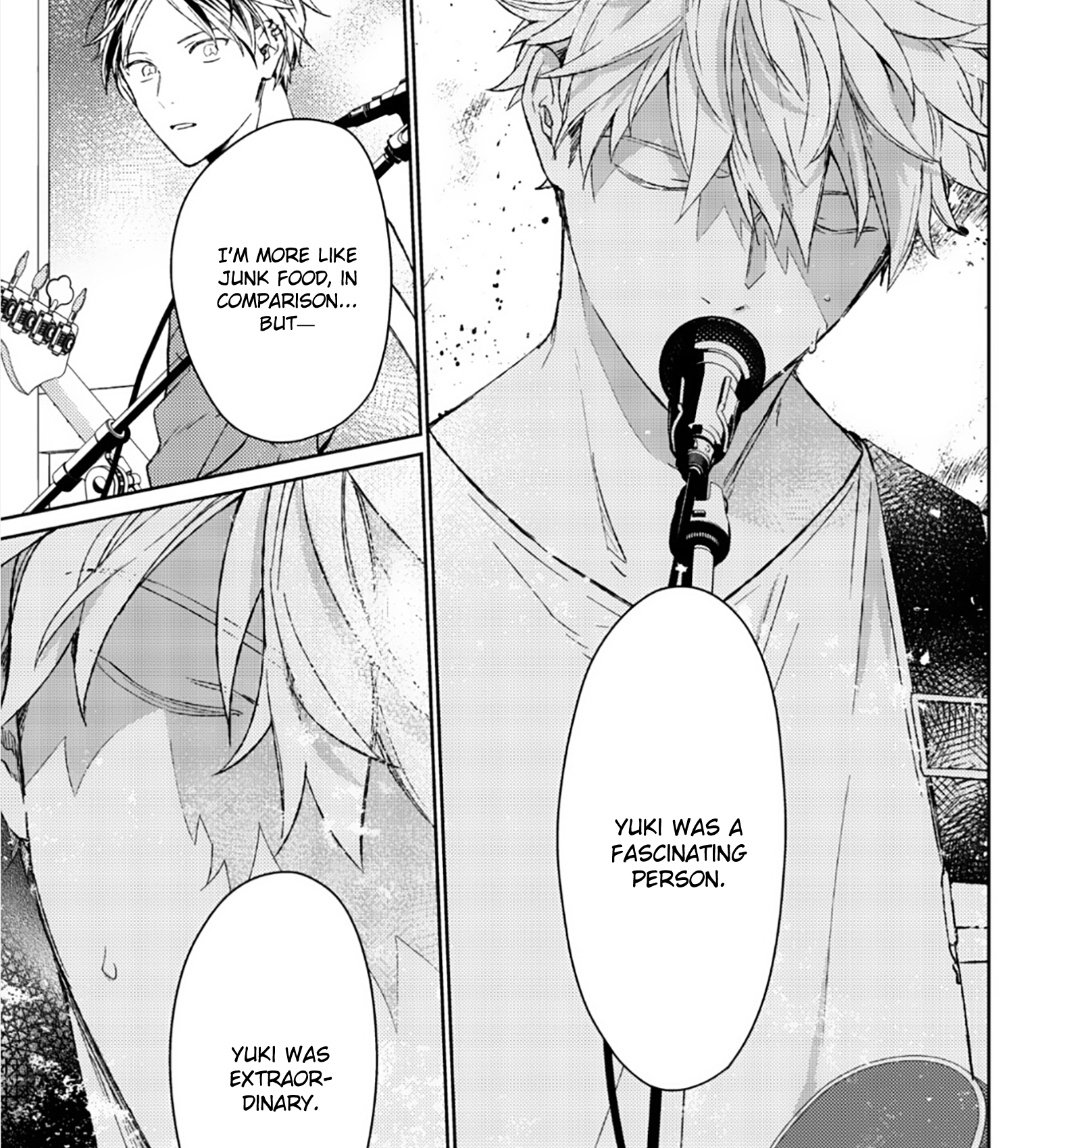 +neither Ritsuka, or Mafuyu, but he thinks of Yuki as perfect. I am sure we'll see the coming chapters just how extraordinary Yuki really was but listening to Hiiragi go on about Yuki's brilliance and then being challenged to finish his song obviously put a lot of pressure on+